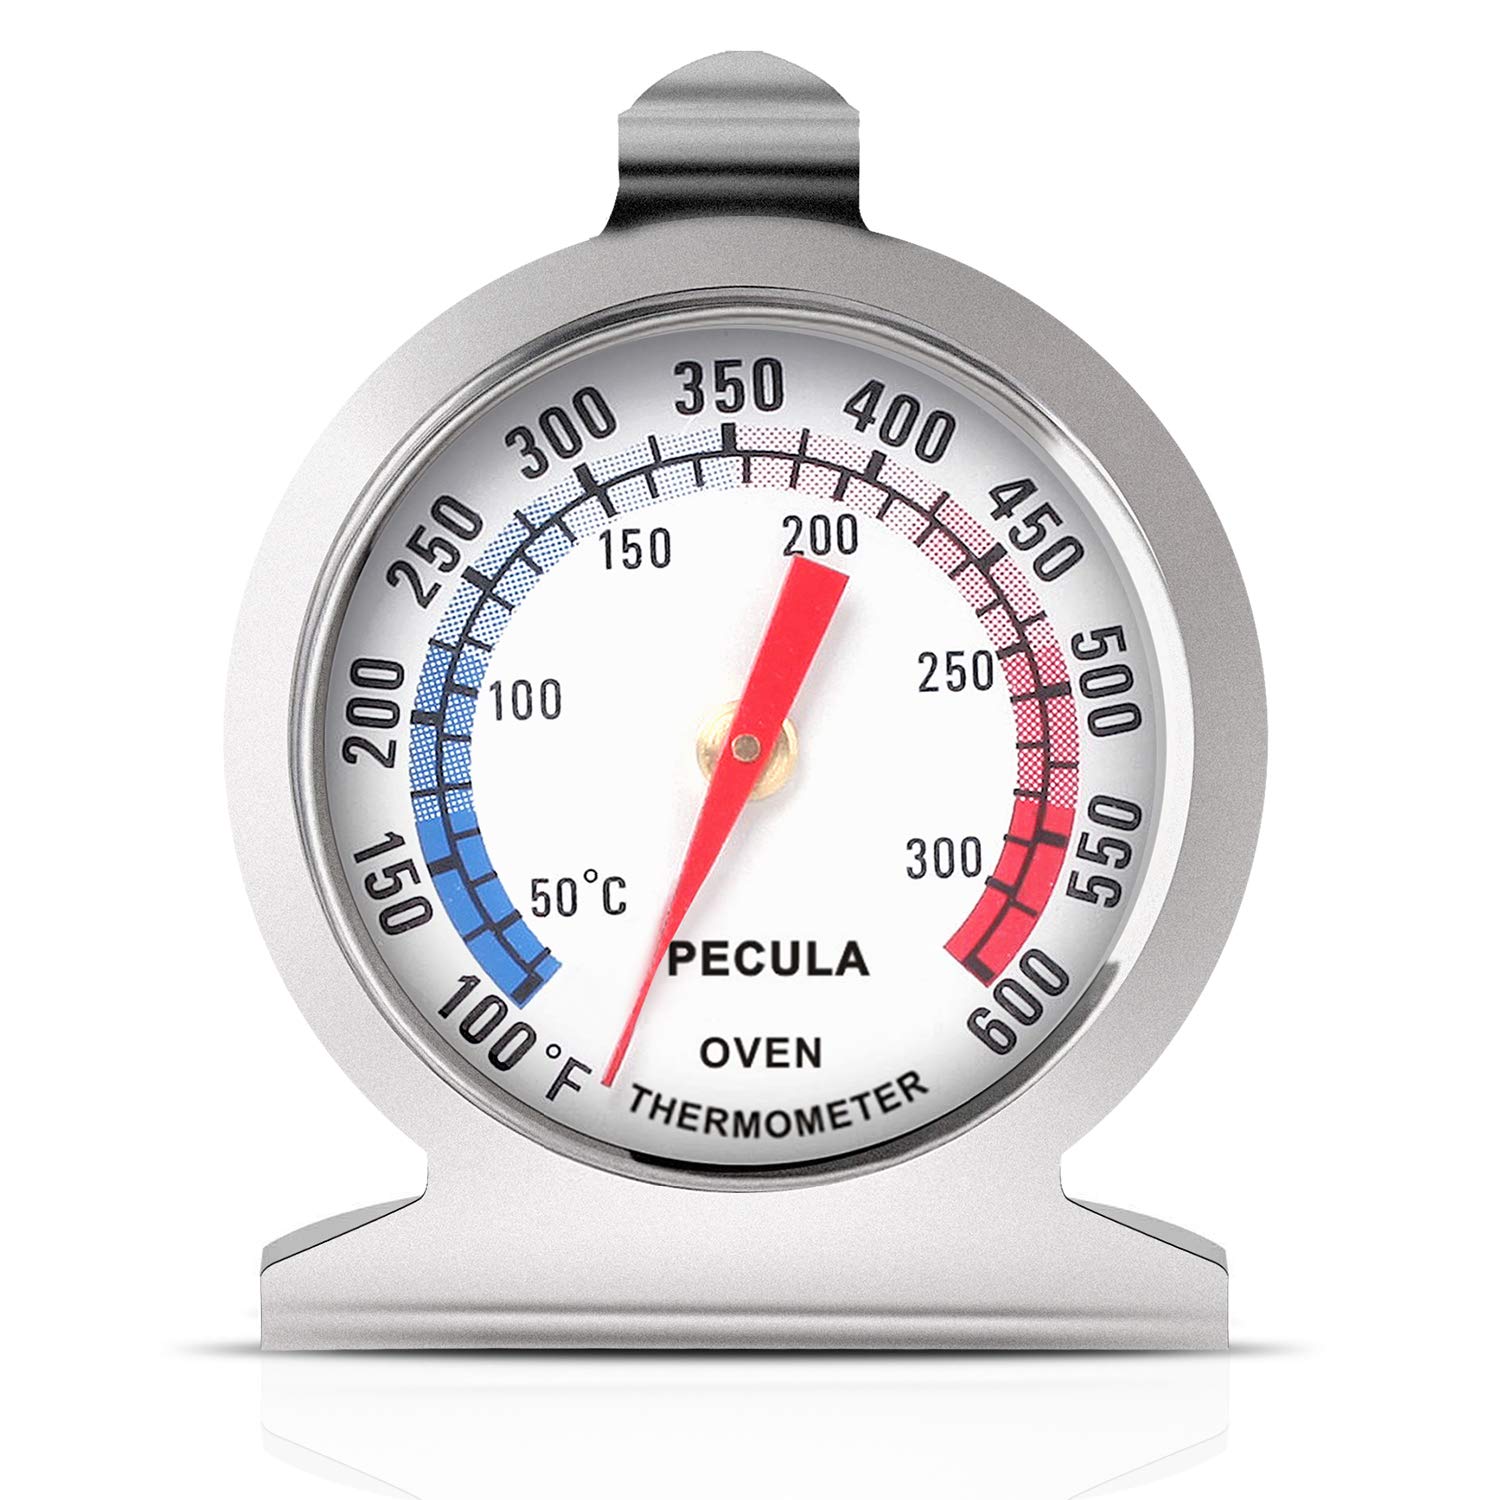 Oven Thermometer 50-300°C/100-600°F, Oven Grill Fry [...]